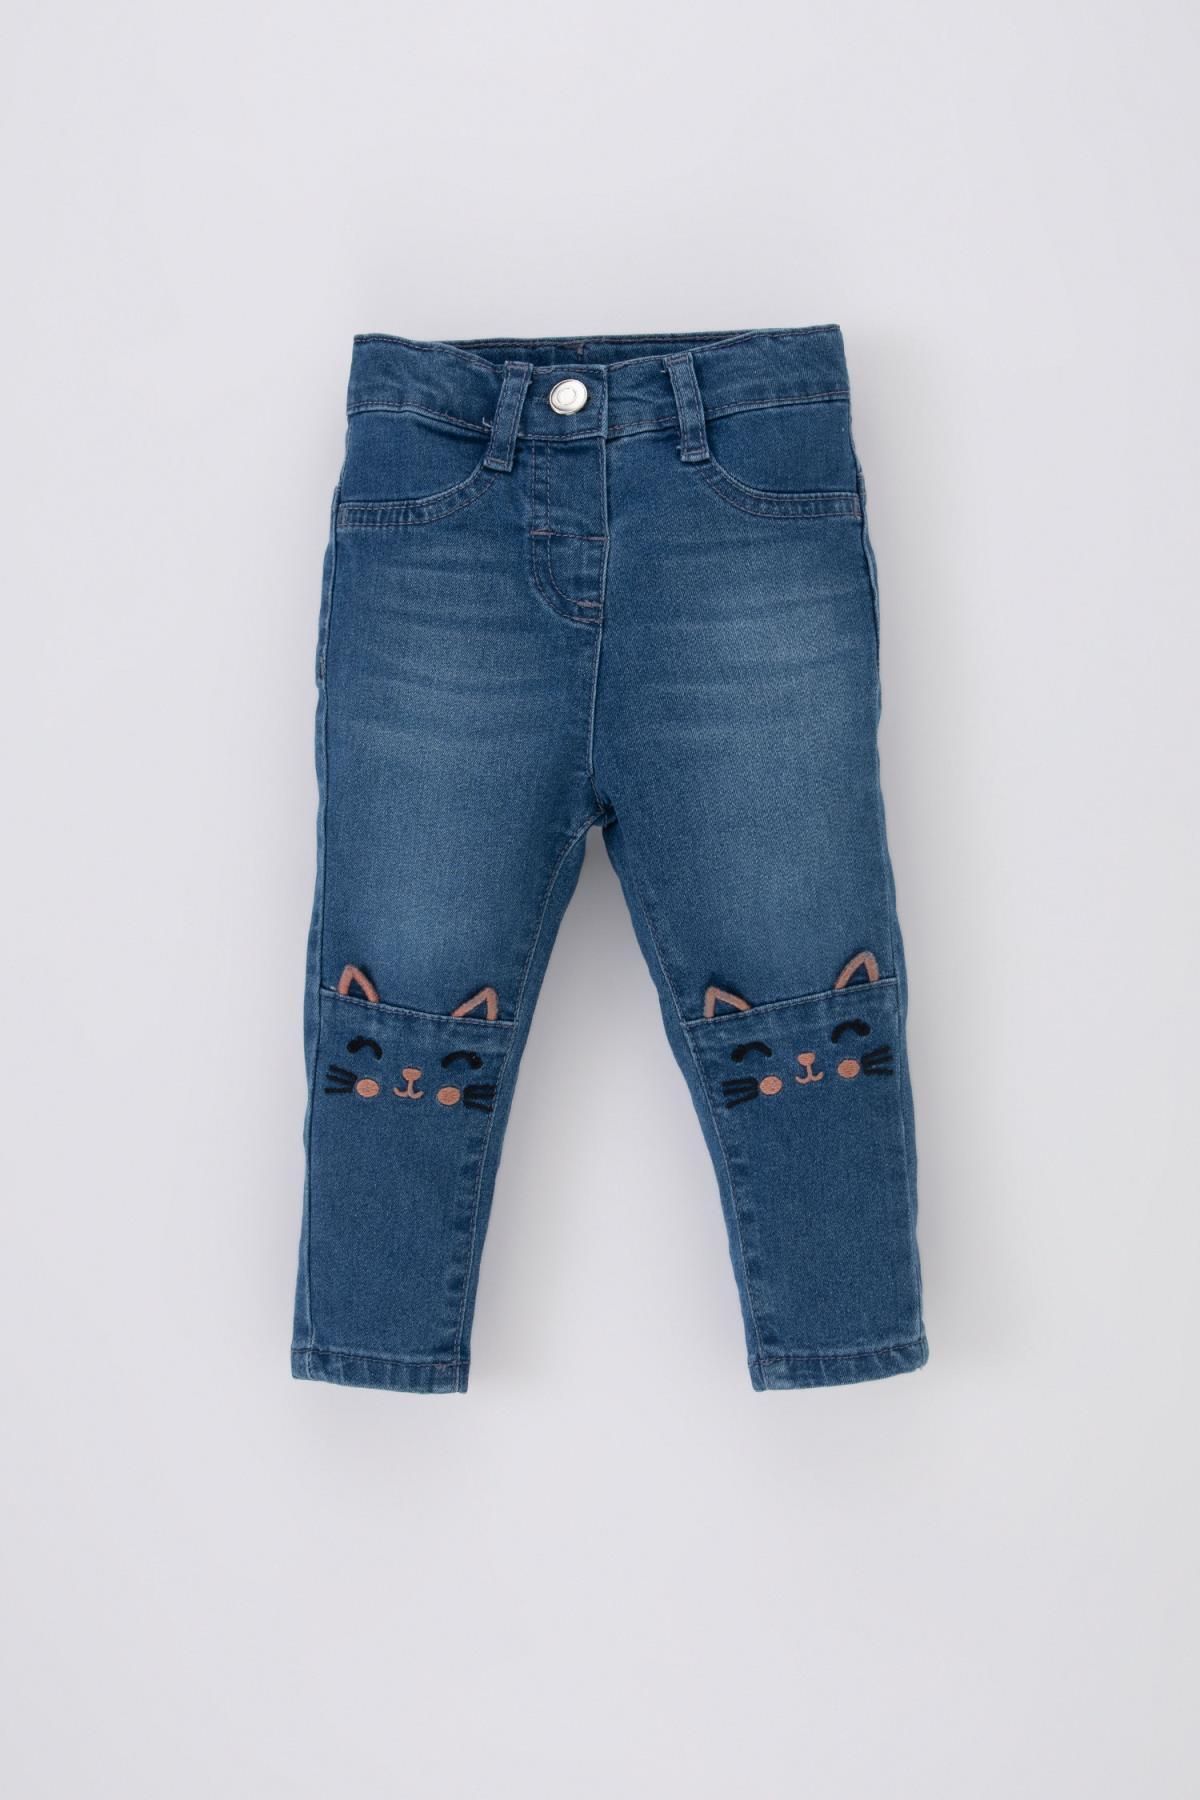 Toddler Baby Girl Jeans Casual High Waisted Wide Leg Pant Straight Denim  Jean Trousers Baggy - Walmart.com